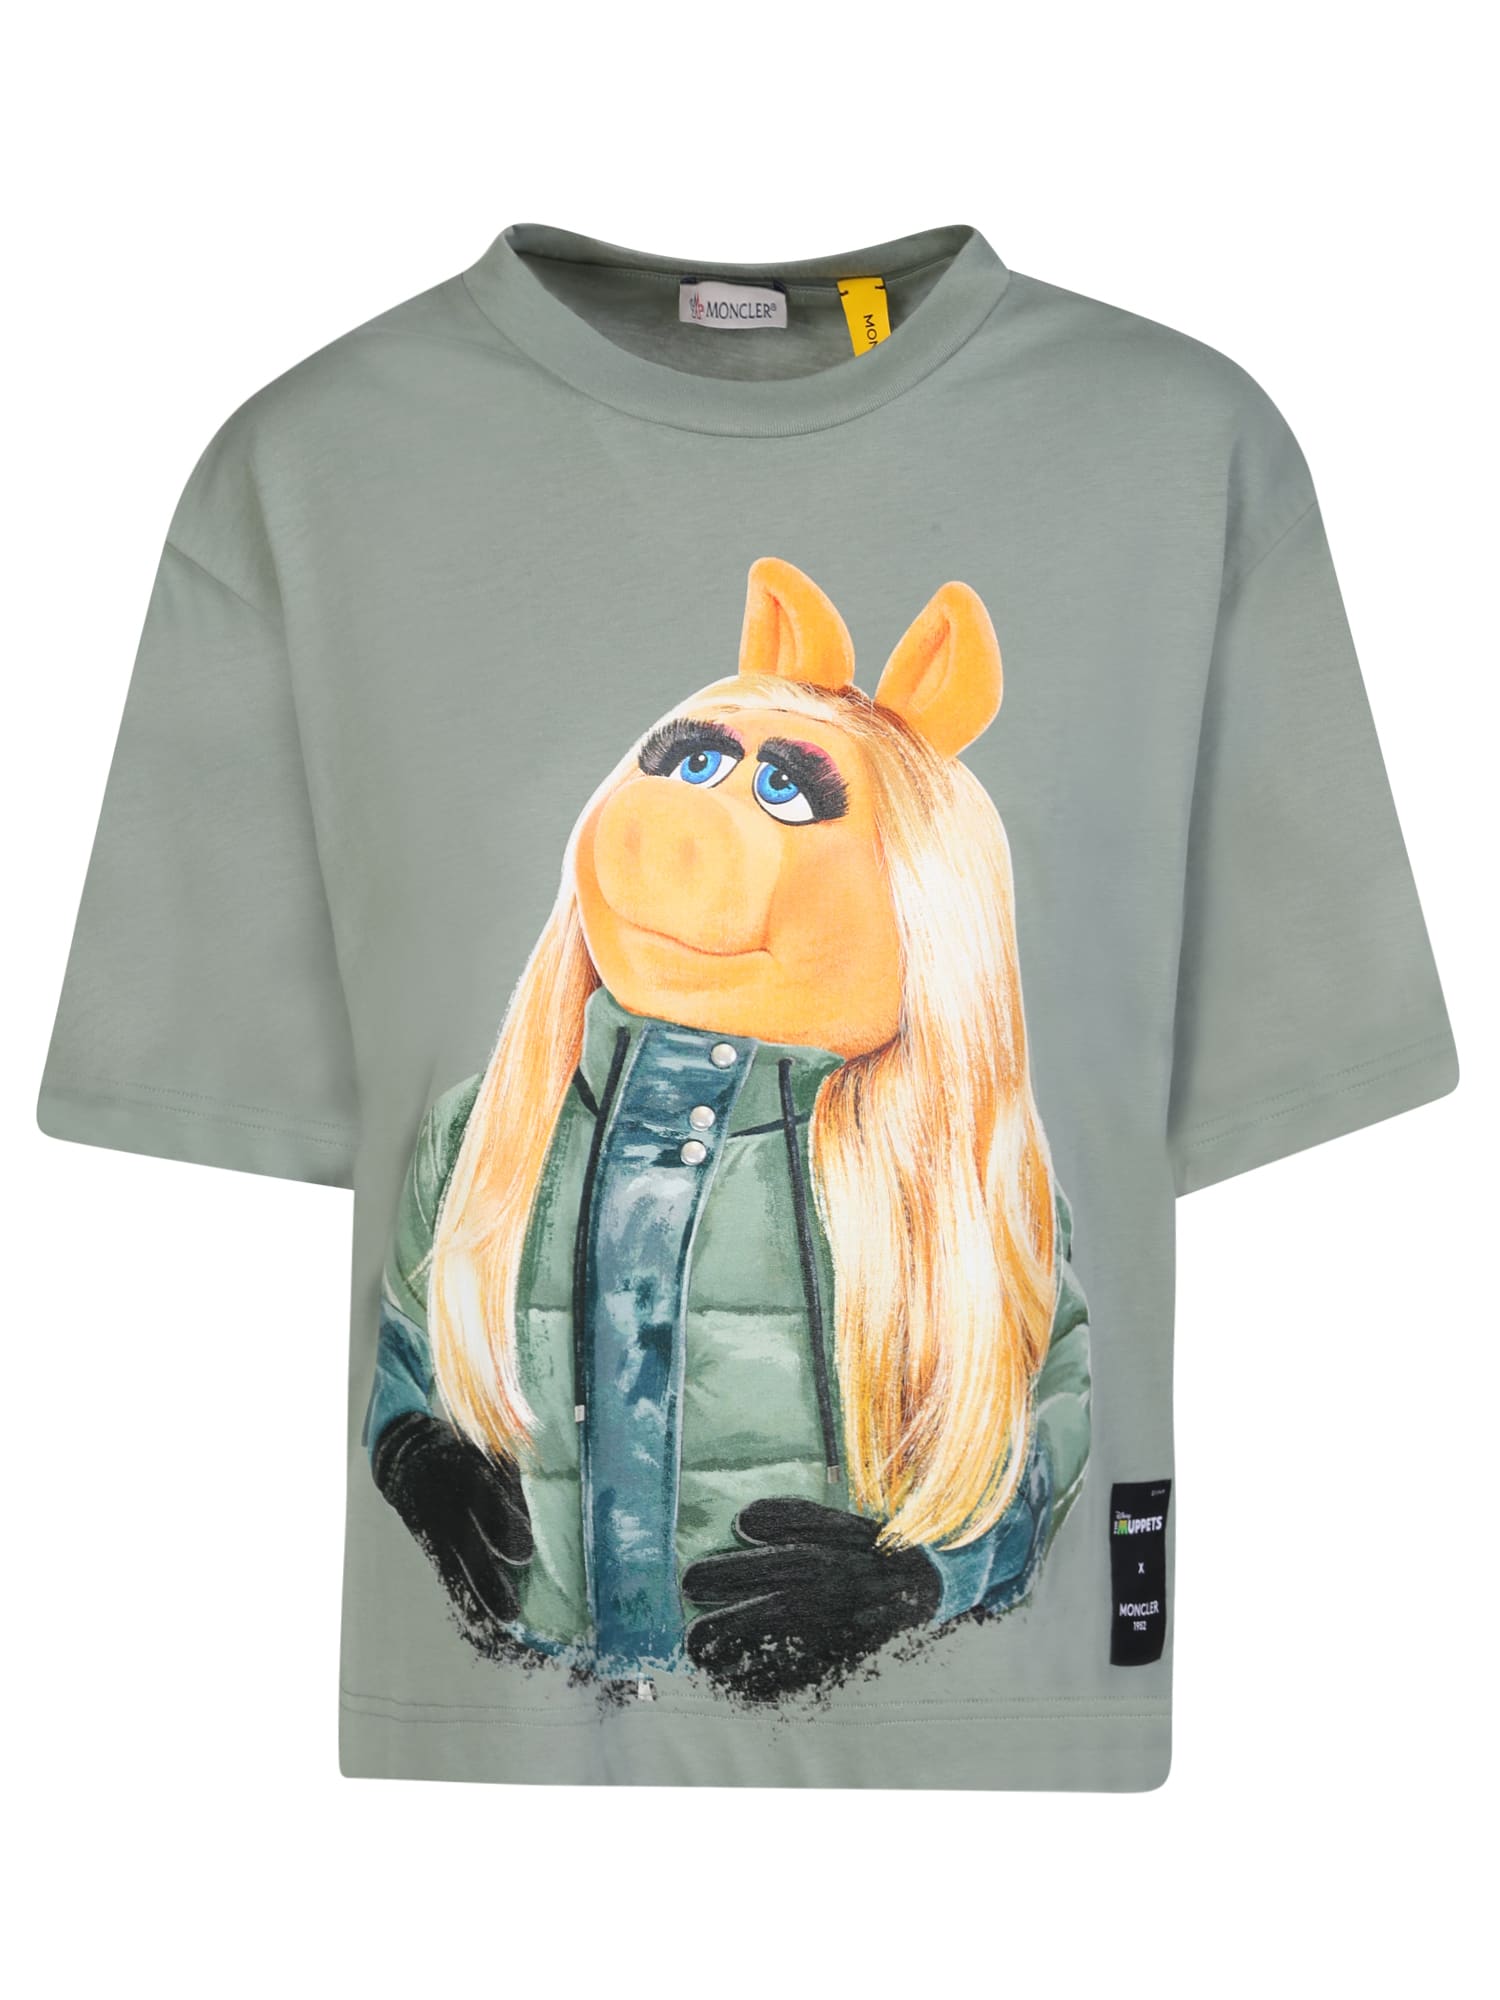 MONCLER GENIUS T-SHIRT WITH MISS PIGGY PRINT BY